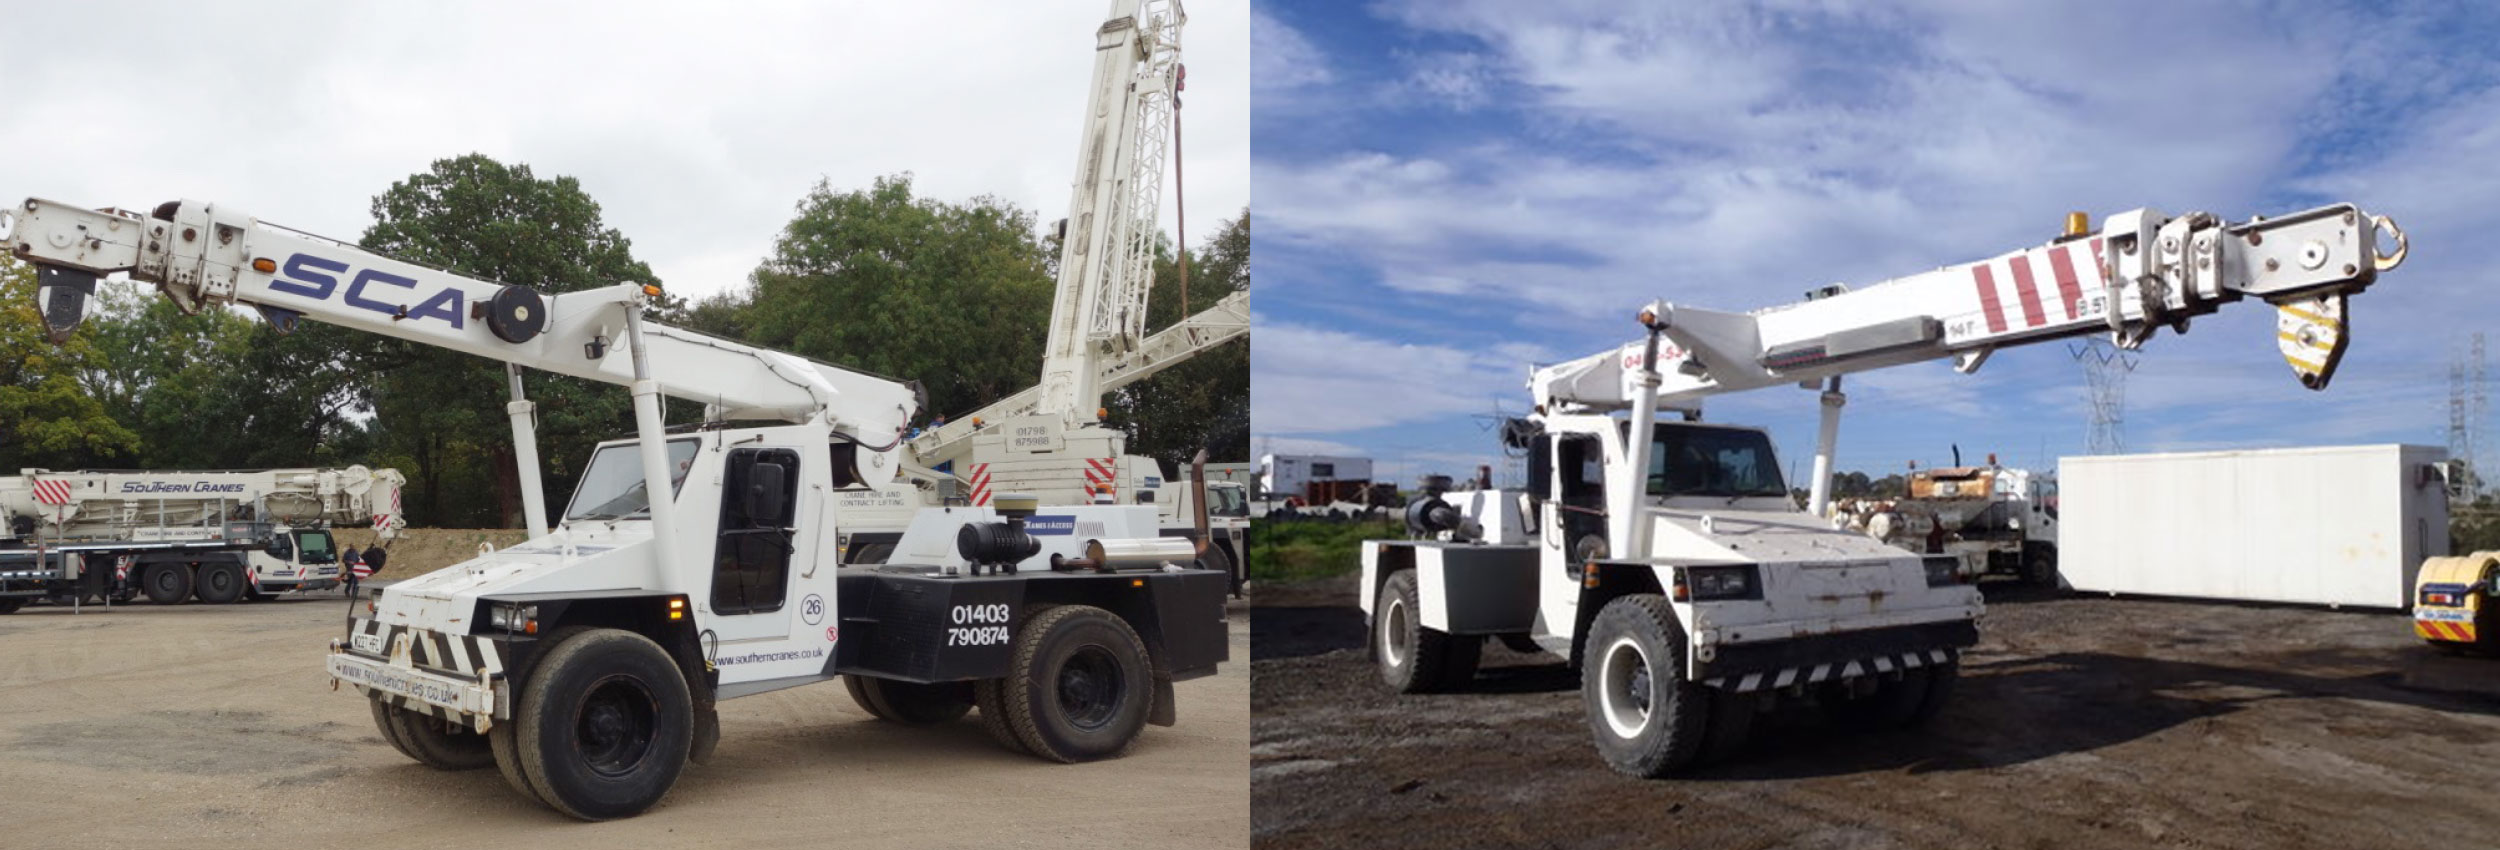 Franna Terex AT14 pick and carry crane for hire at Southern Cranes & Access, West Sussex, UK